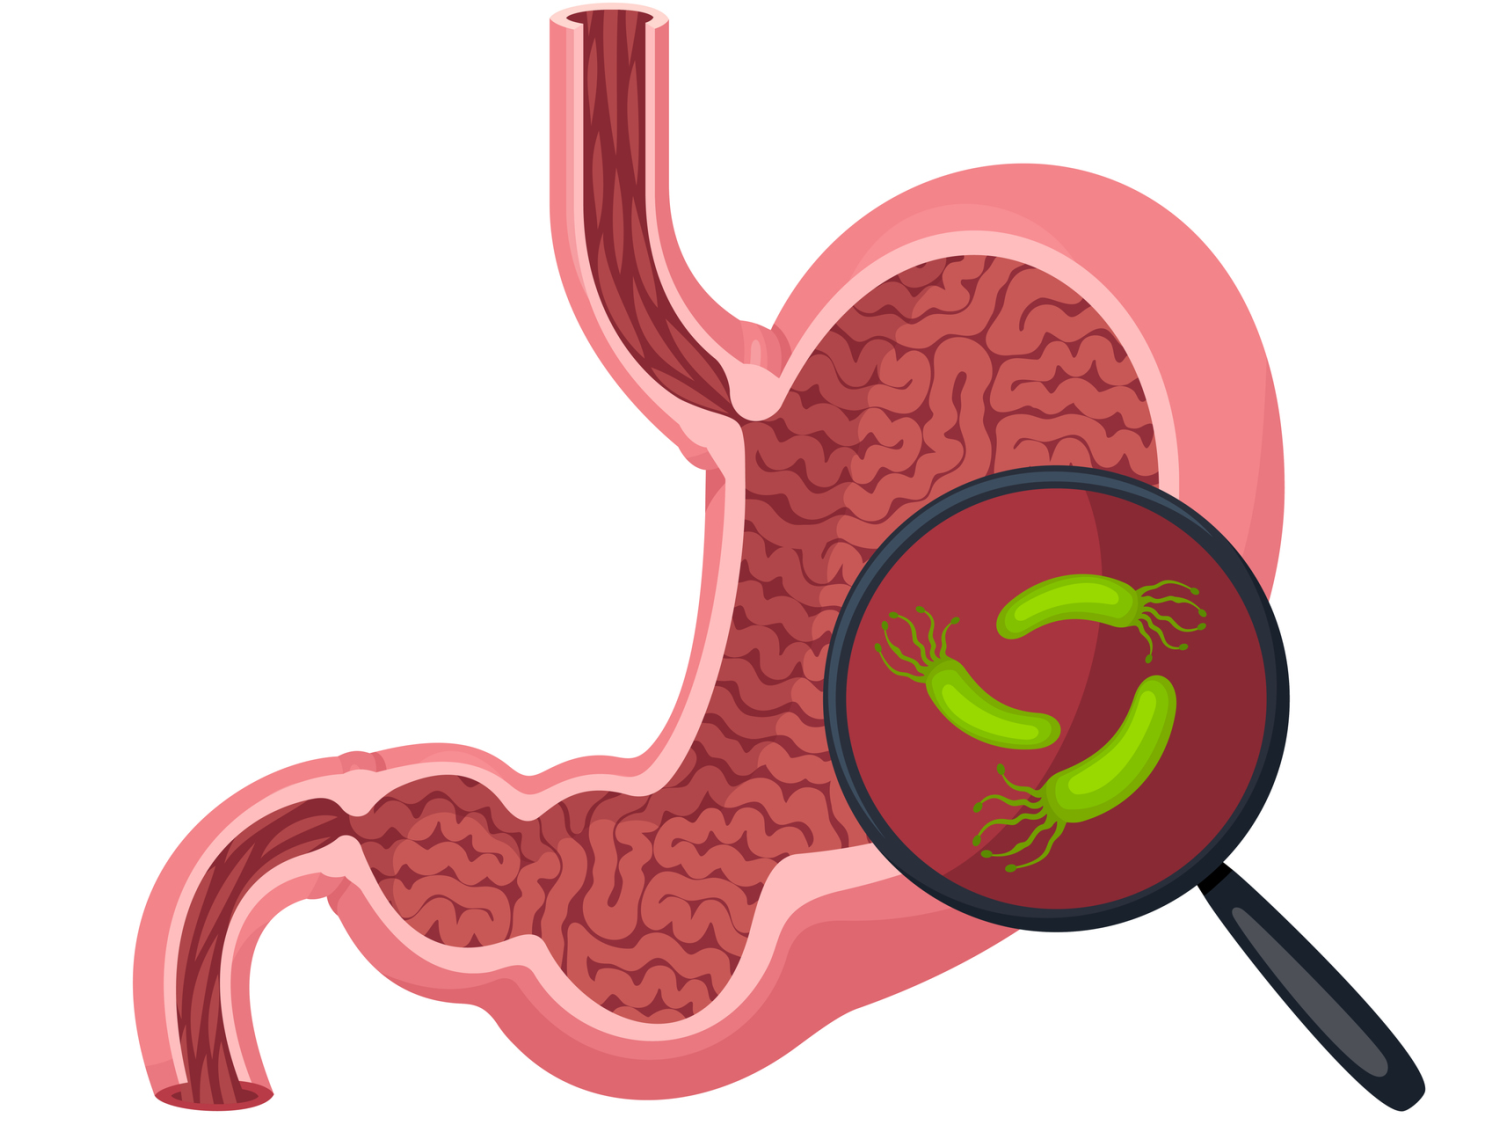 Illustration of a stomach. A magnifying glass is placed over a portion of it, revealing microorganisms.